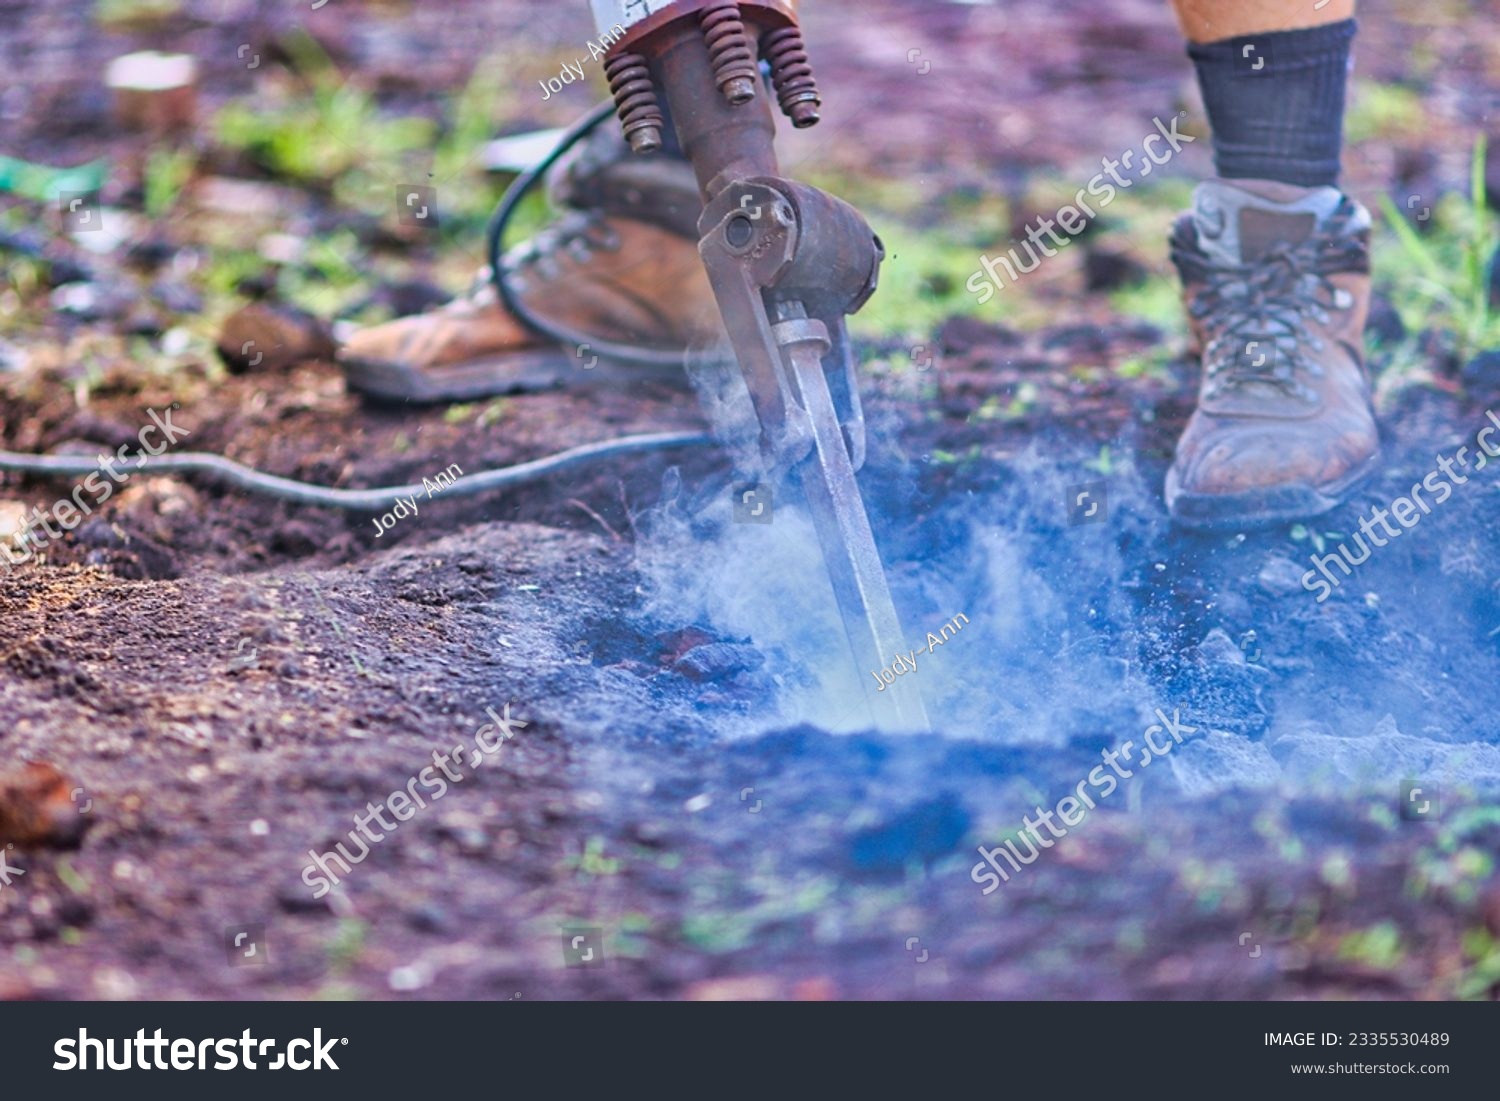 man wearing work boots using a jackhammer that is breaking up rocks and sending dust and debris into the air.   #2335530489